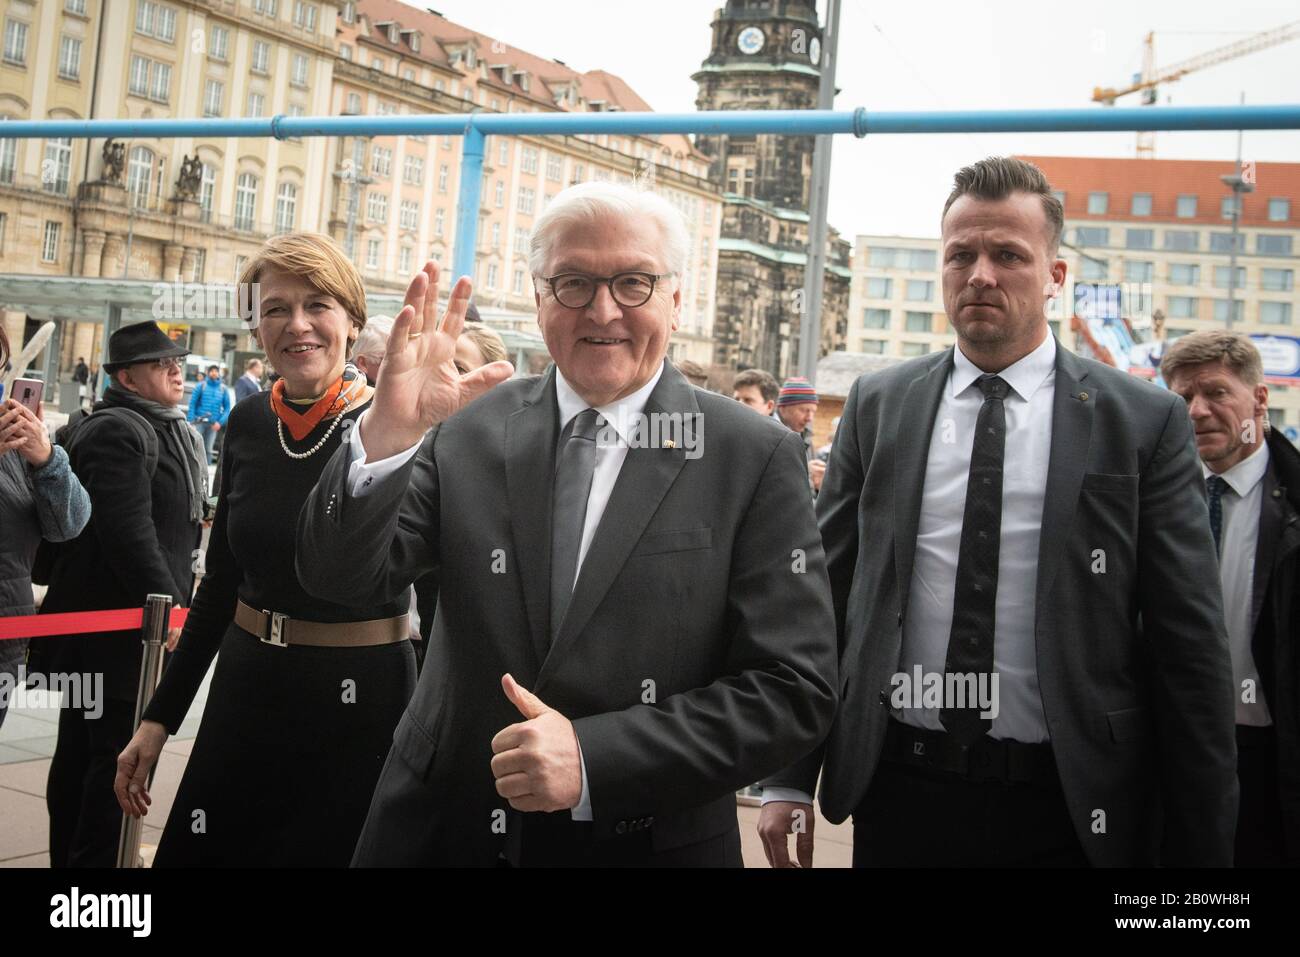 13th February 2020. Kulturpalast, Dresden, Saxony, Germany. German Federal President, Frank Walter Steinmeier, arrives at the Palace of Culture (Kultu Stock Photo